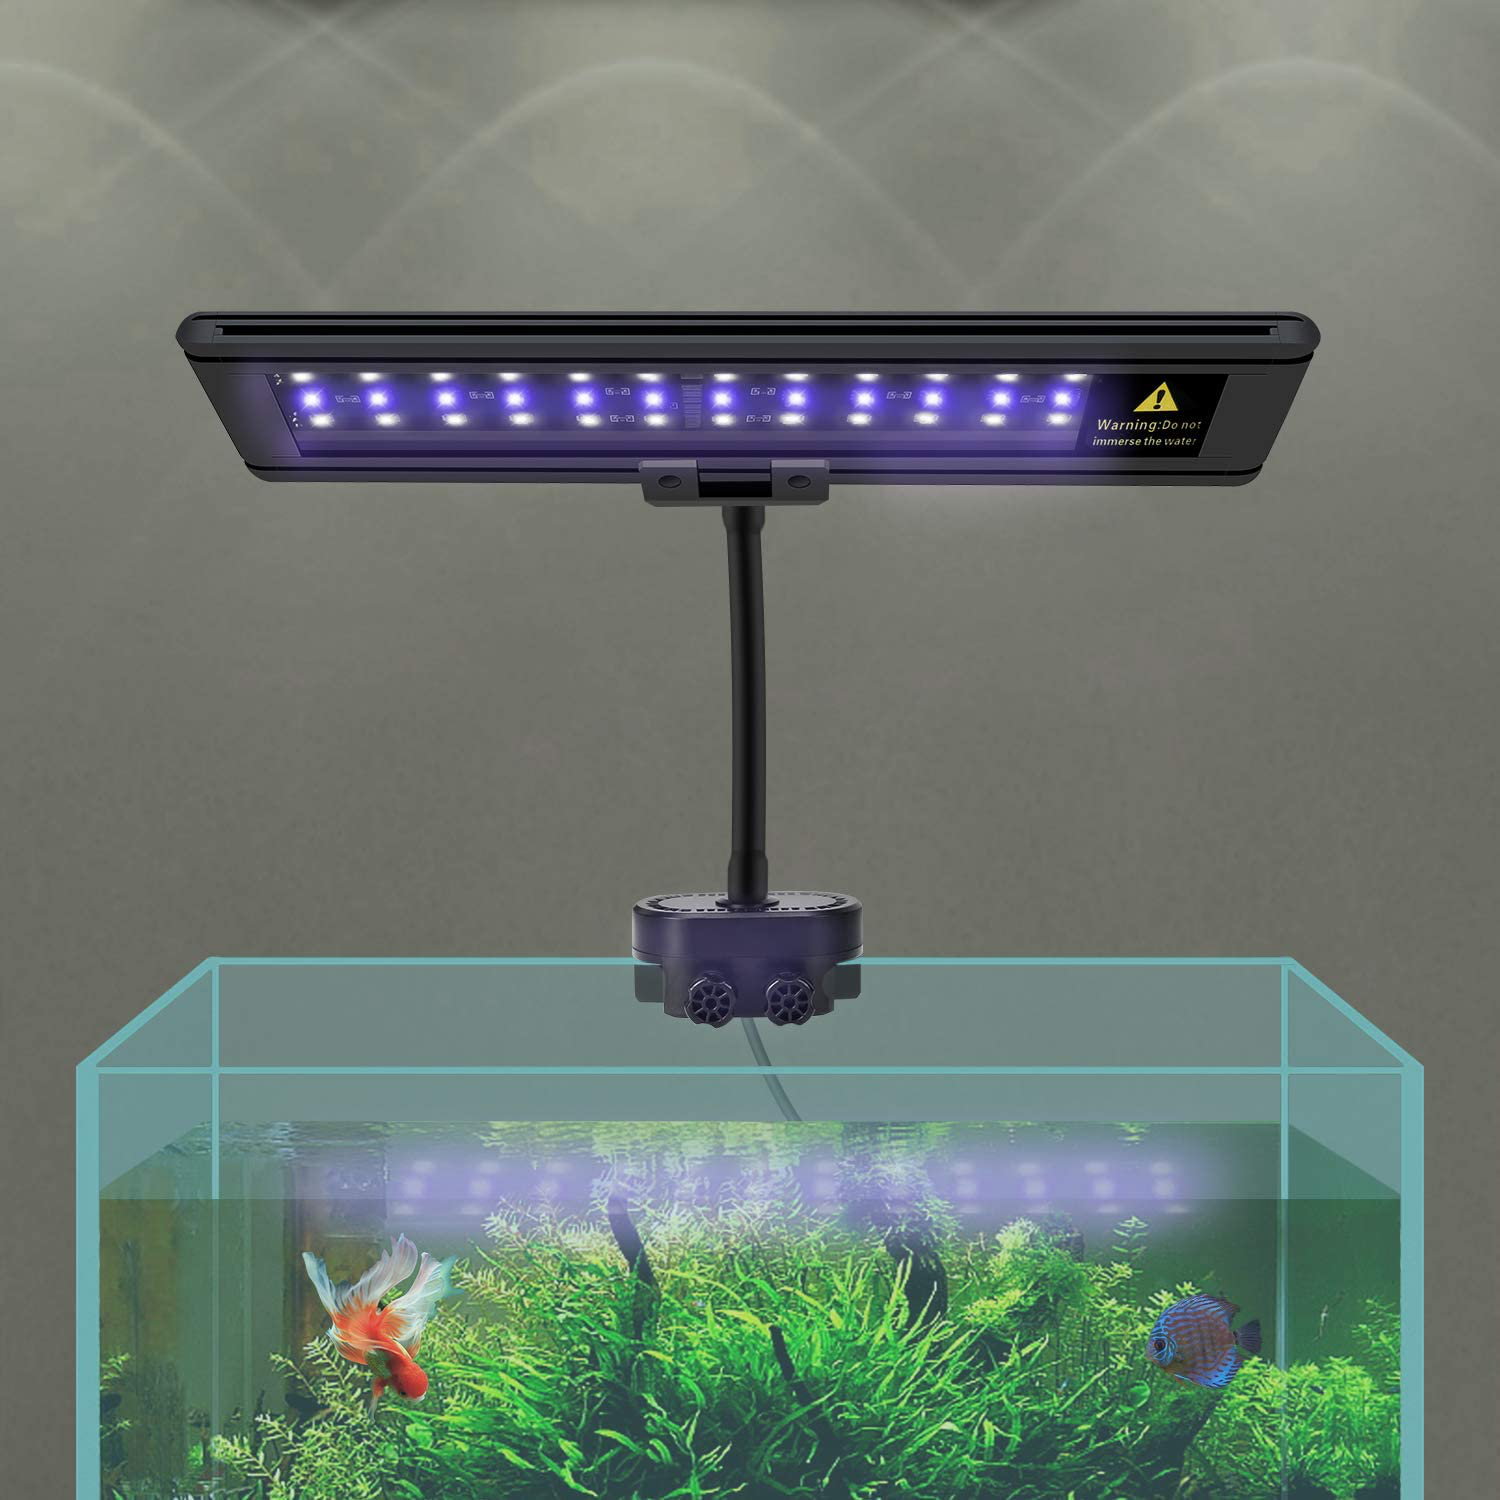 IREENUO Aquarium LED Light, Full Spectrum Fish Tank Clip on Light with Remote, Color Changing Lighting for Reef Coral Aquatic Plants and Fish Keeping